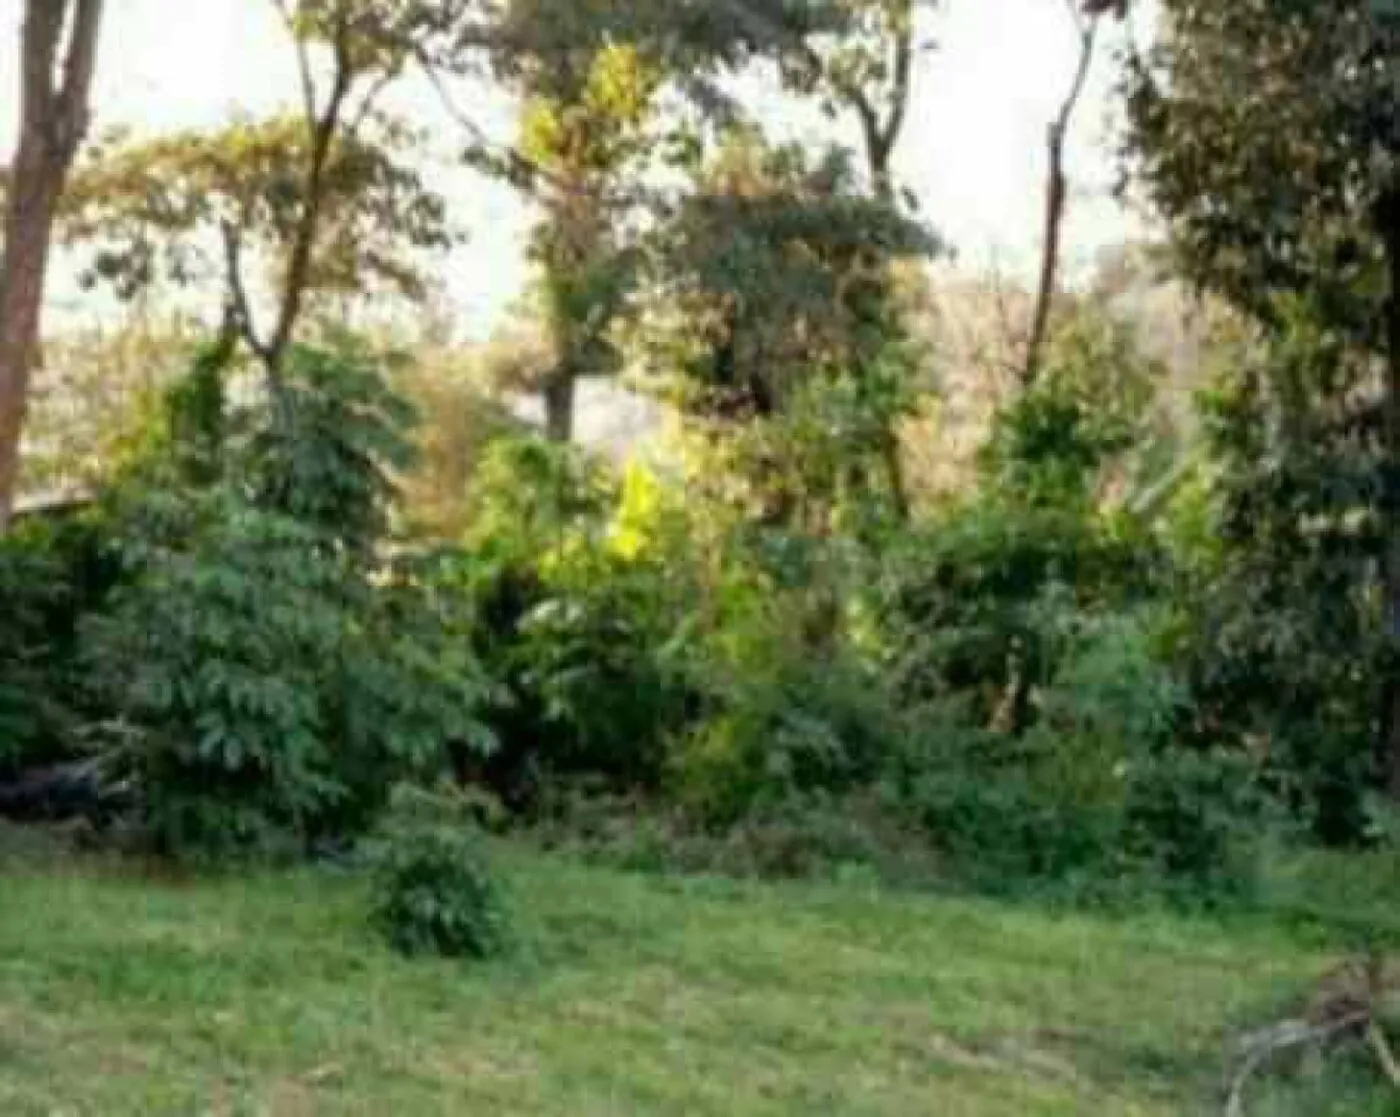 Land For Sale Real Estate-Land for sale in Karen Hardy 1/2 Acre @30M Ready Title Deed QUICK SALE Exclusive half acre 0.5🔥 13